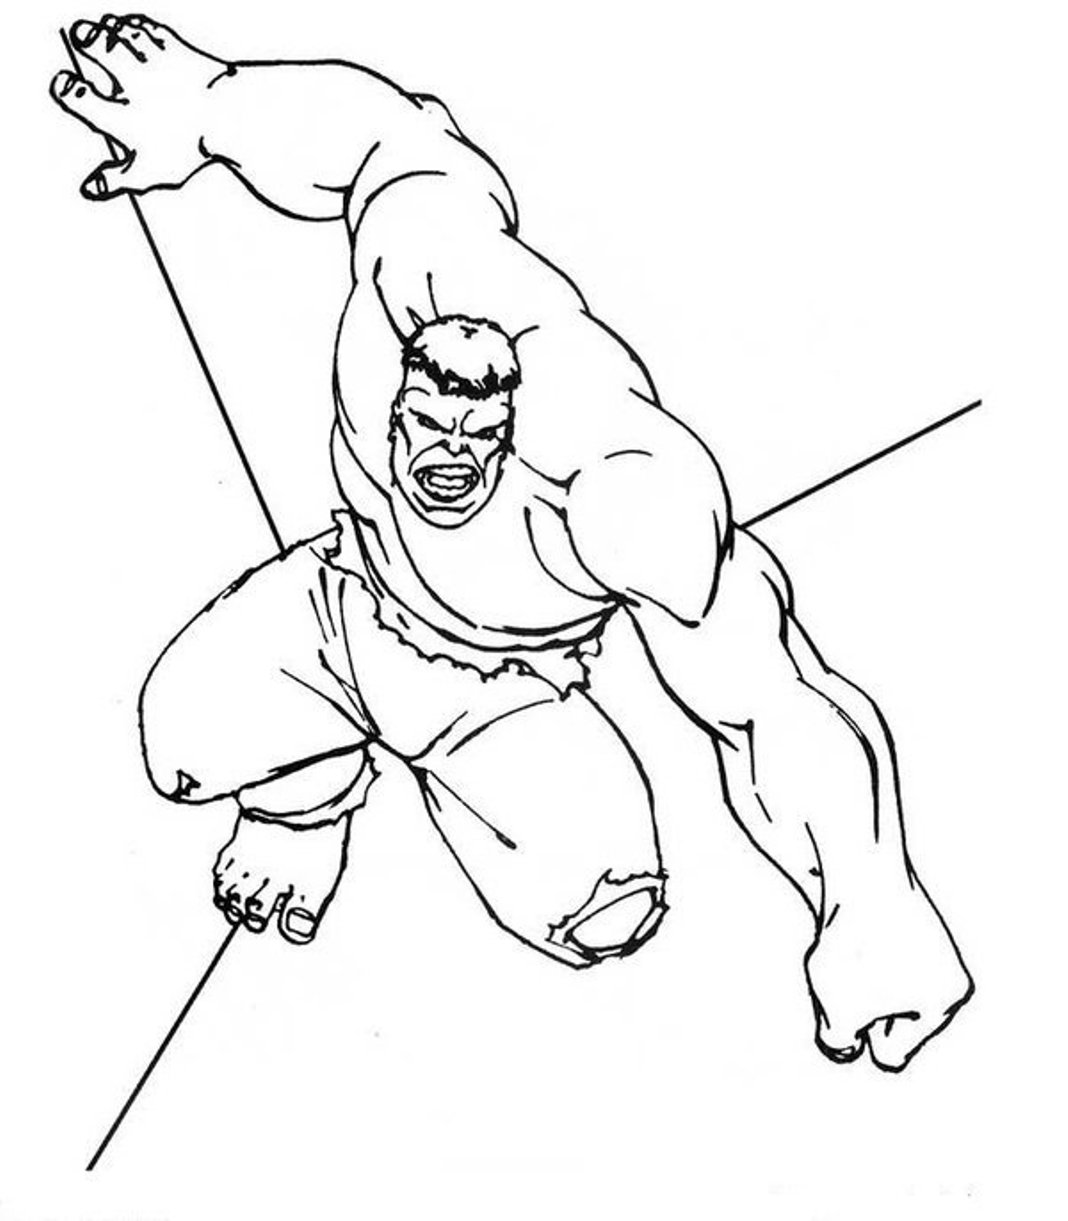 The Strong Man Hulk S3331 Coloring Page